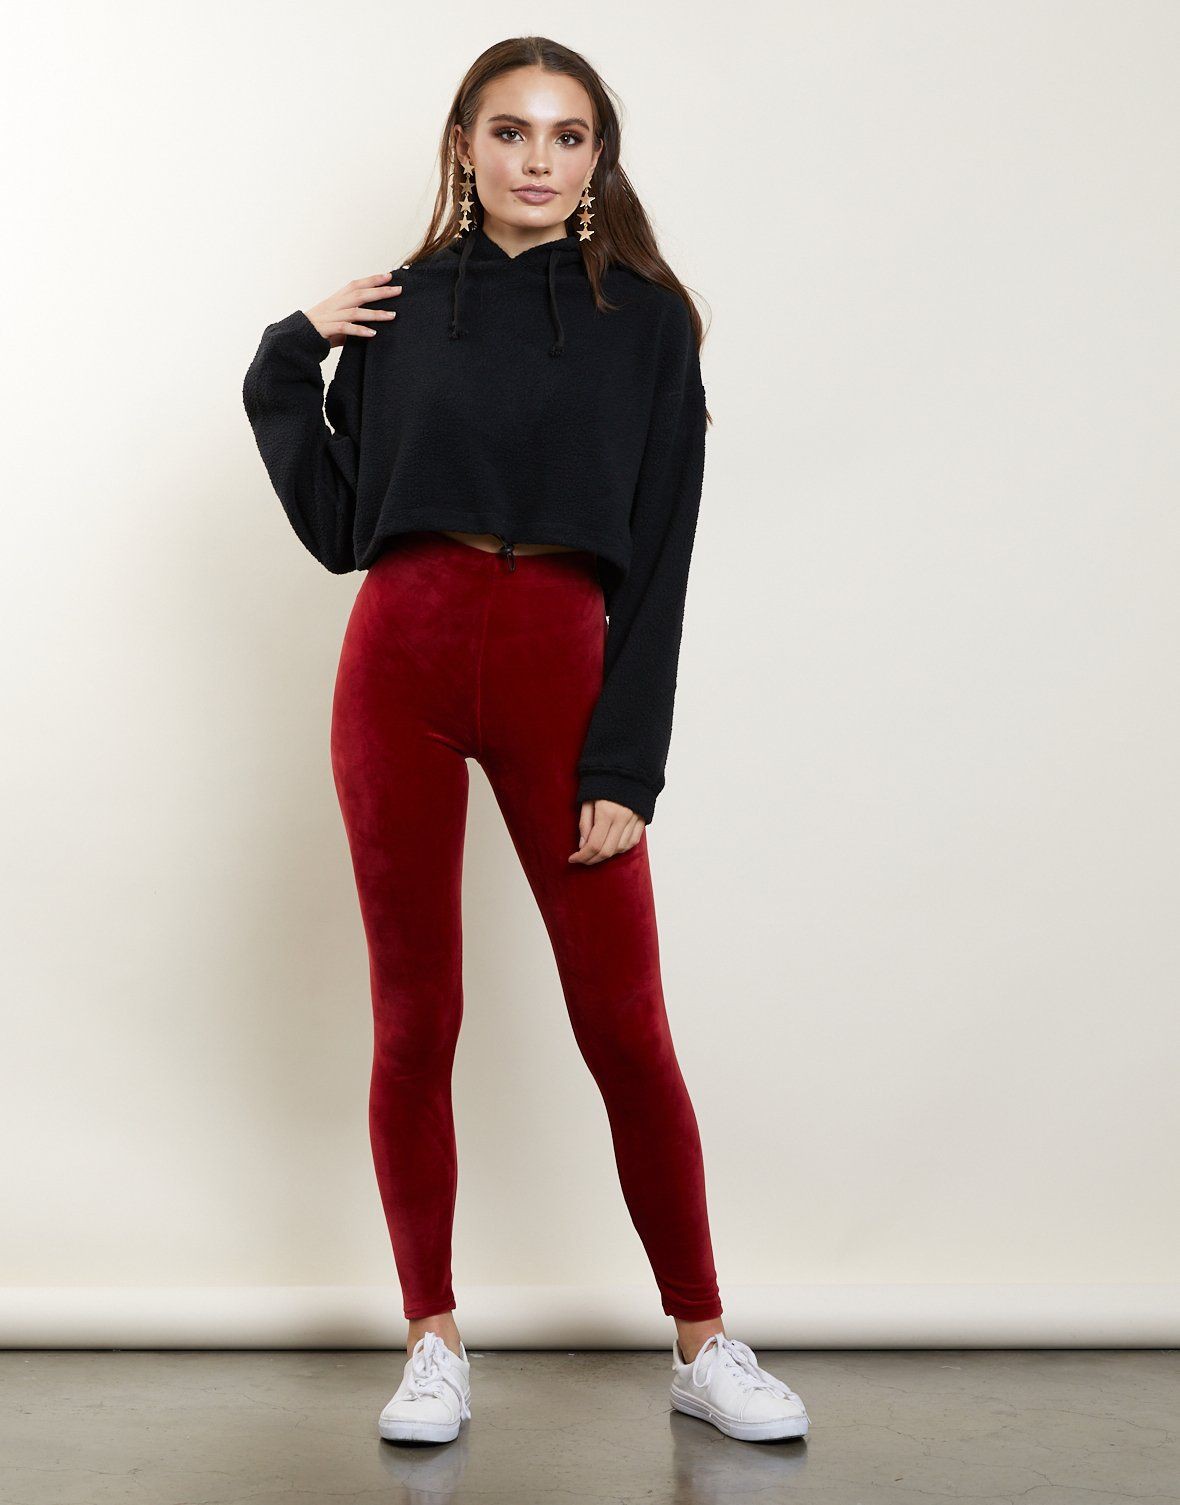 Danielle P  Velvet leggings outfit, Outfits with leggings, Quirky fashion